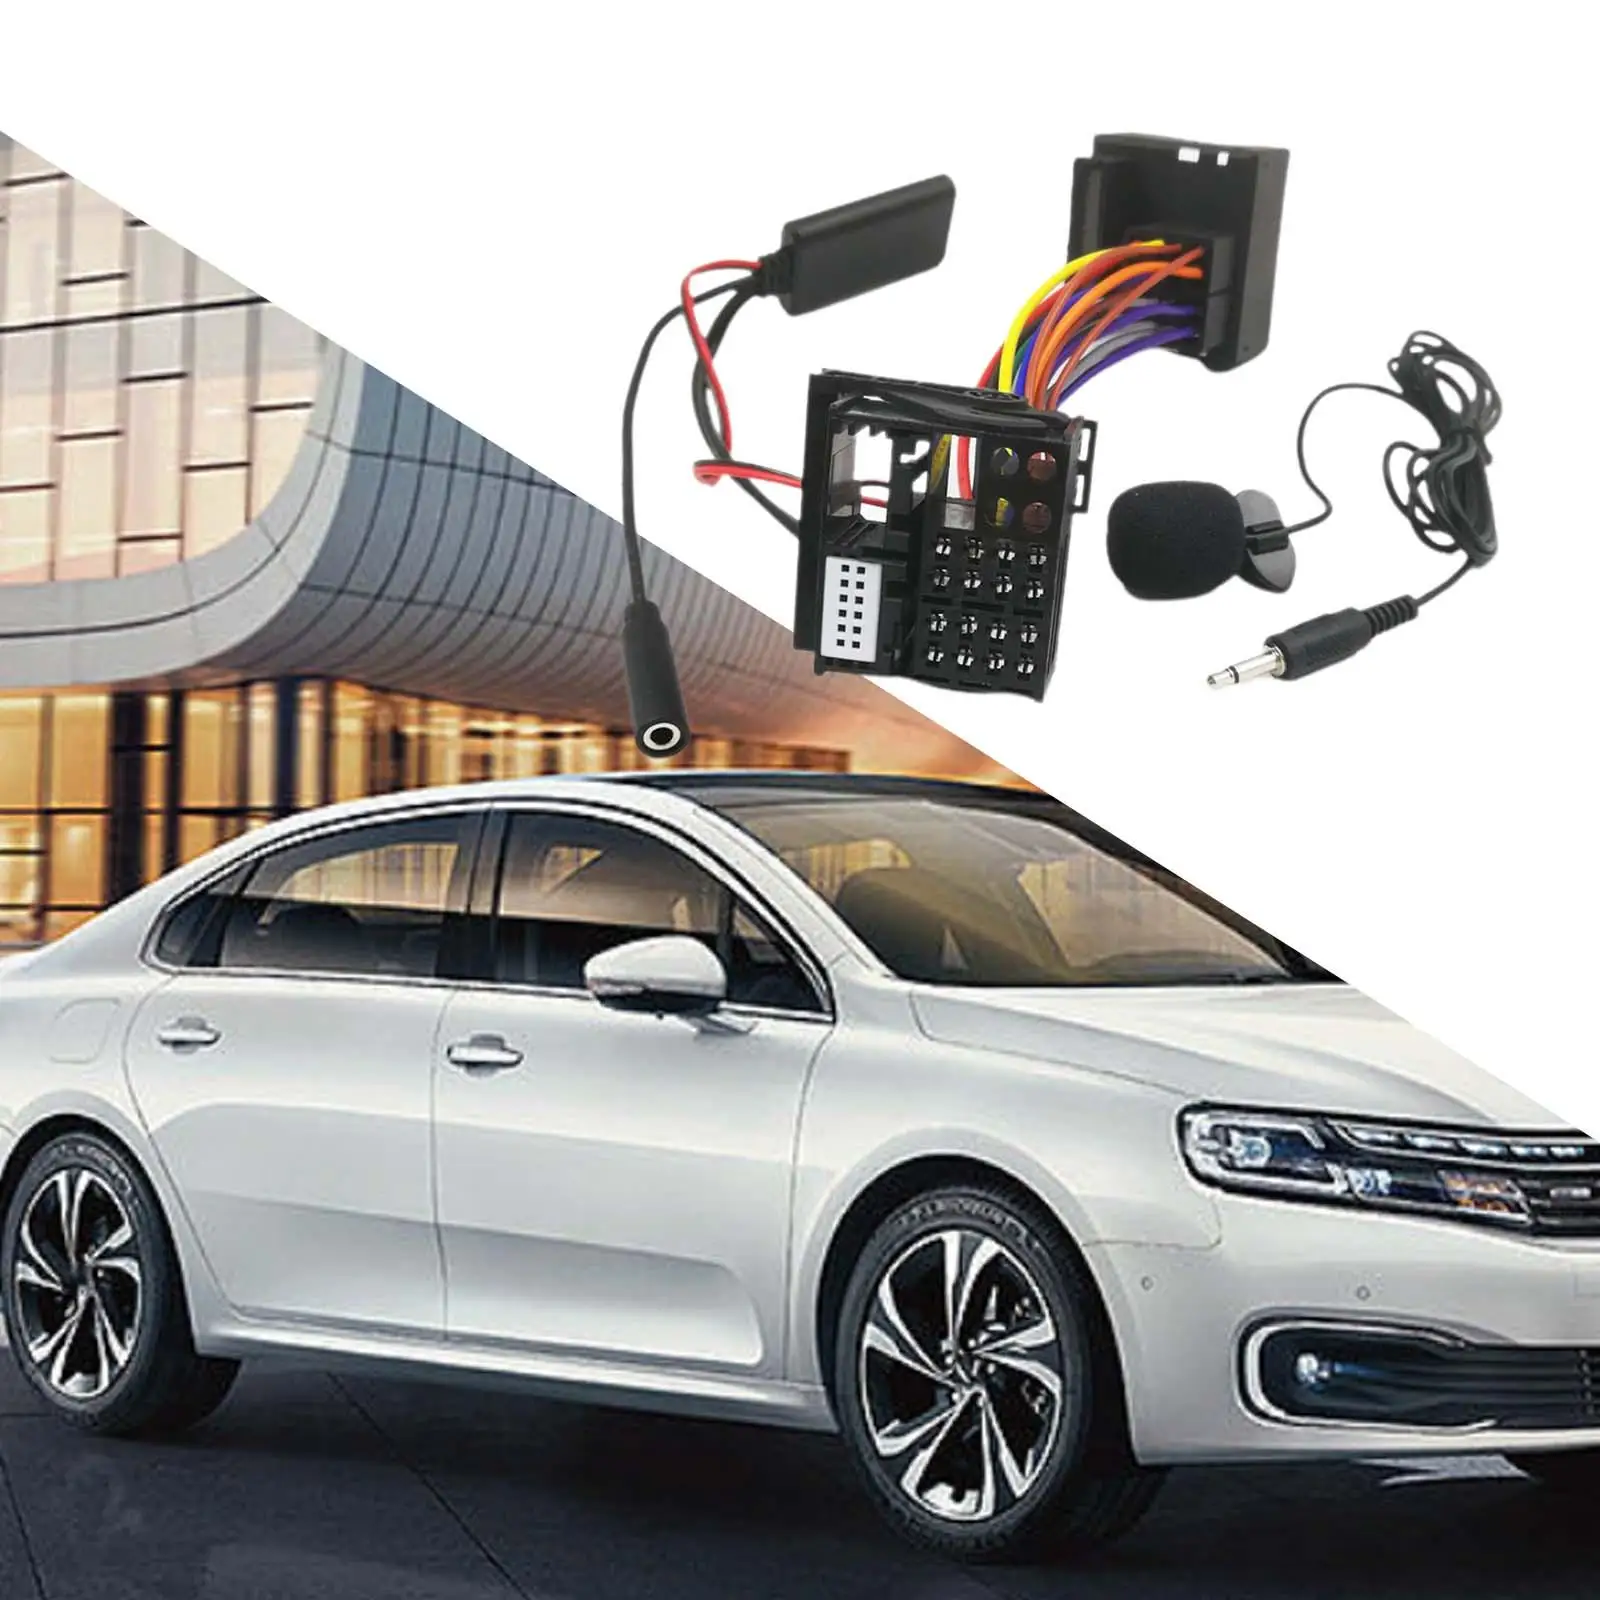 Bluetooth 5.0 Module Receiver Adapter High Performance with Mic Audio Adapter for Peugeot 207 307 307SW 407 308